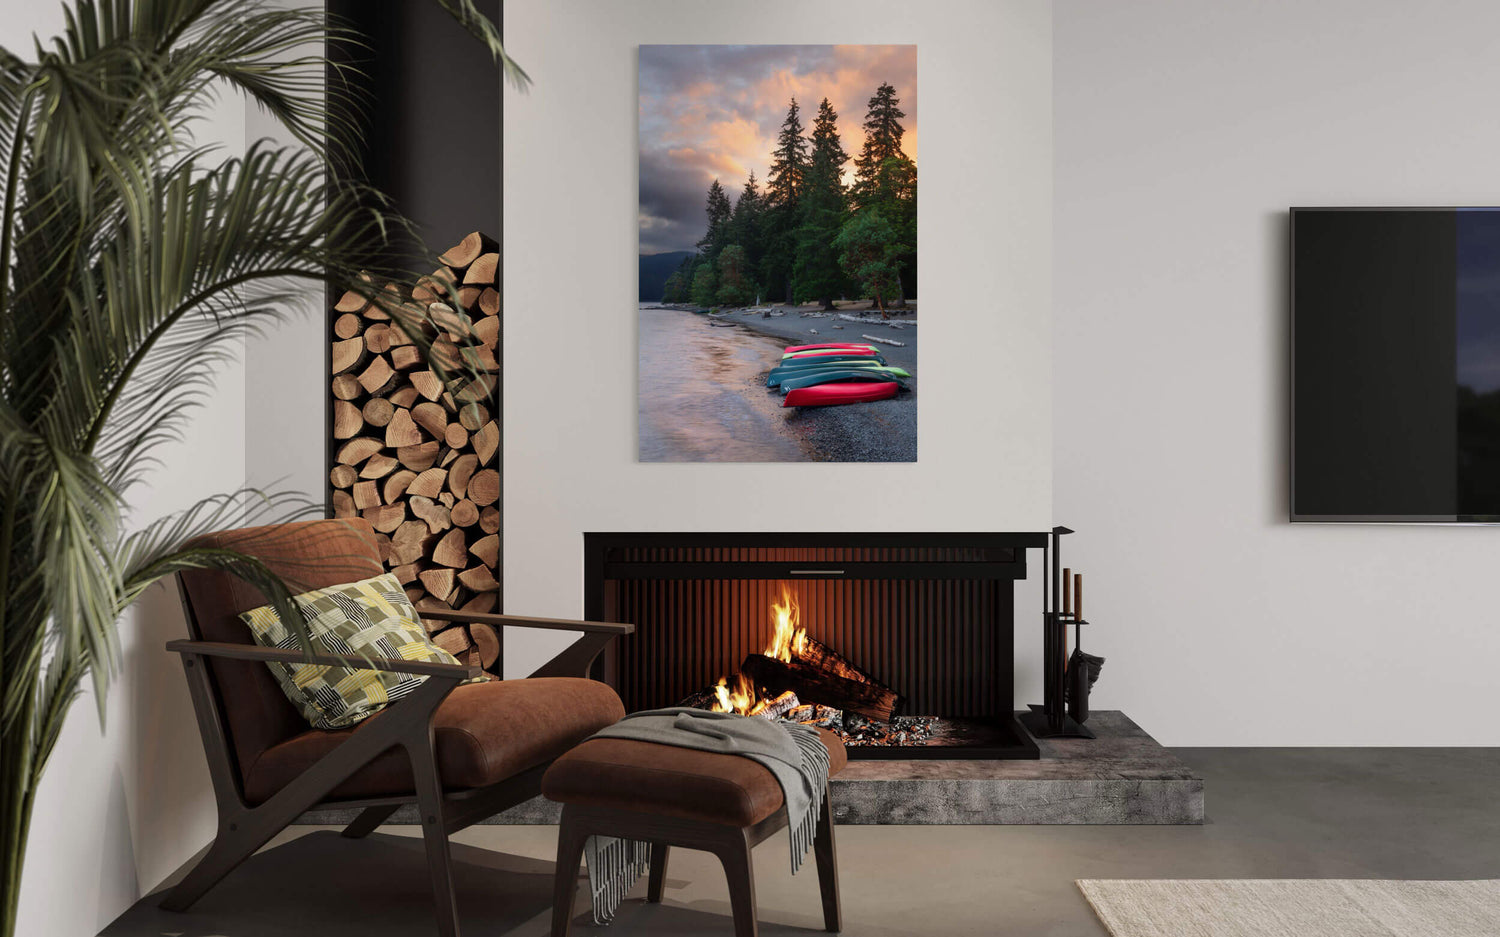 A Crescent Lake picture from Washington hangs in a living room.